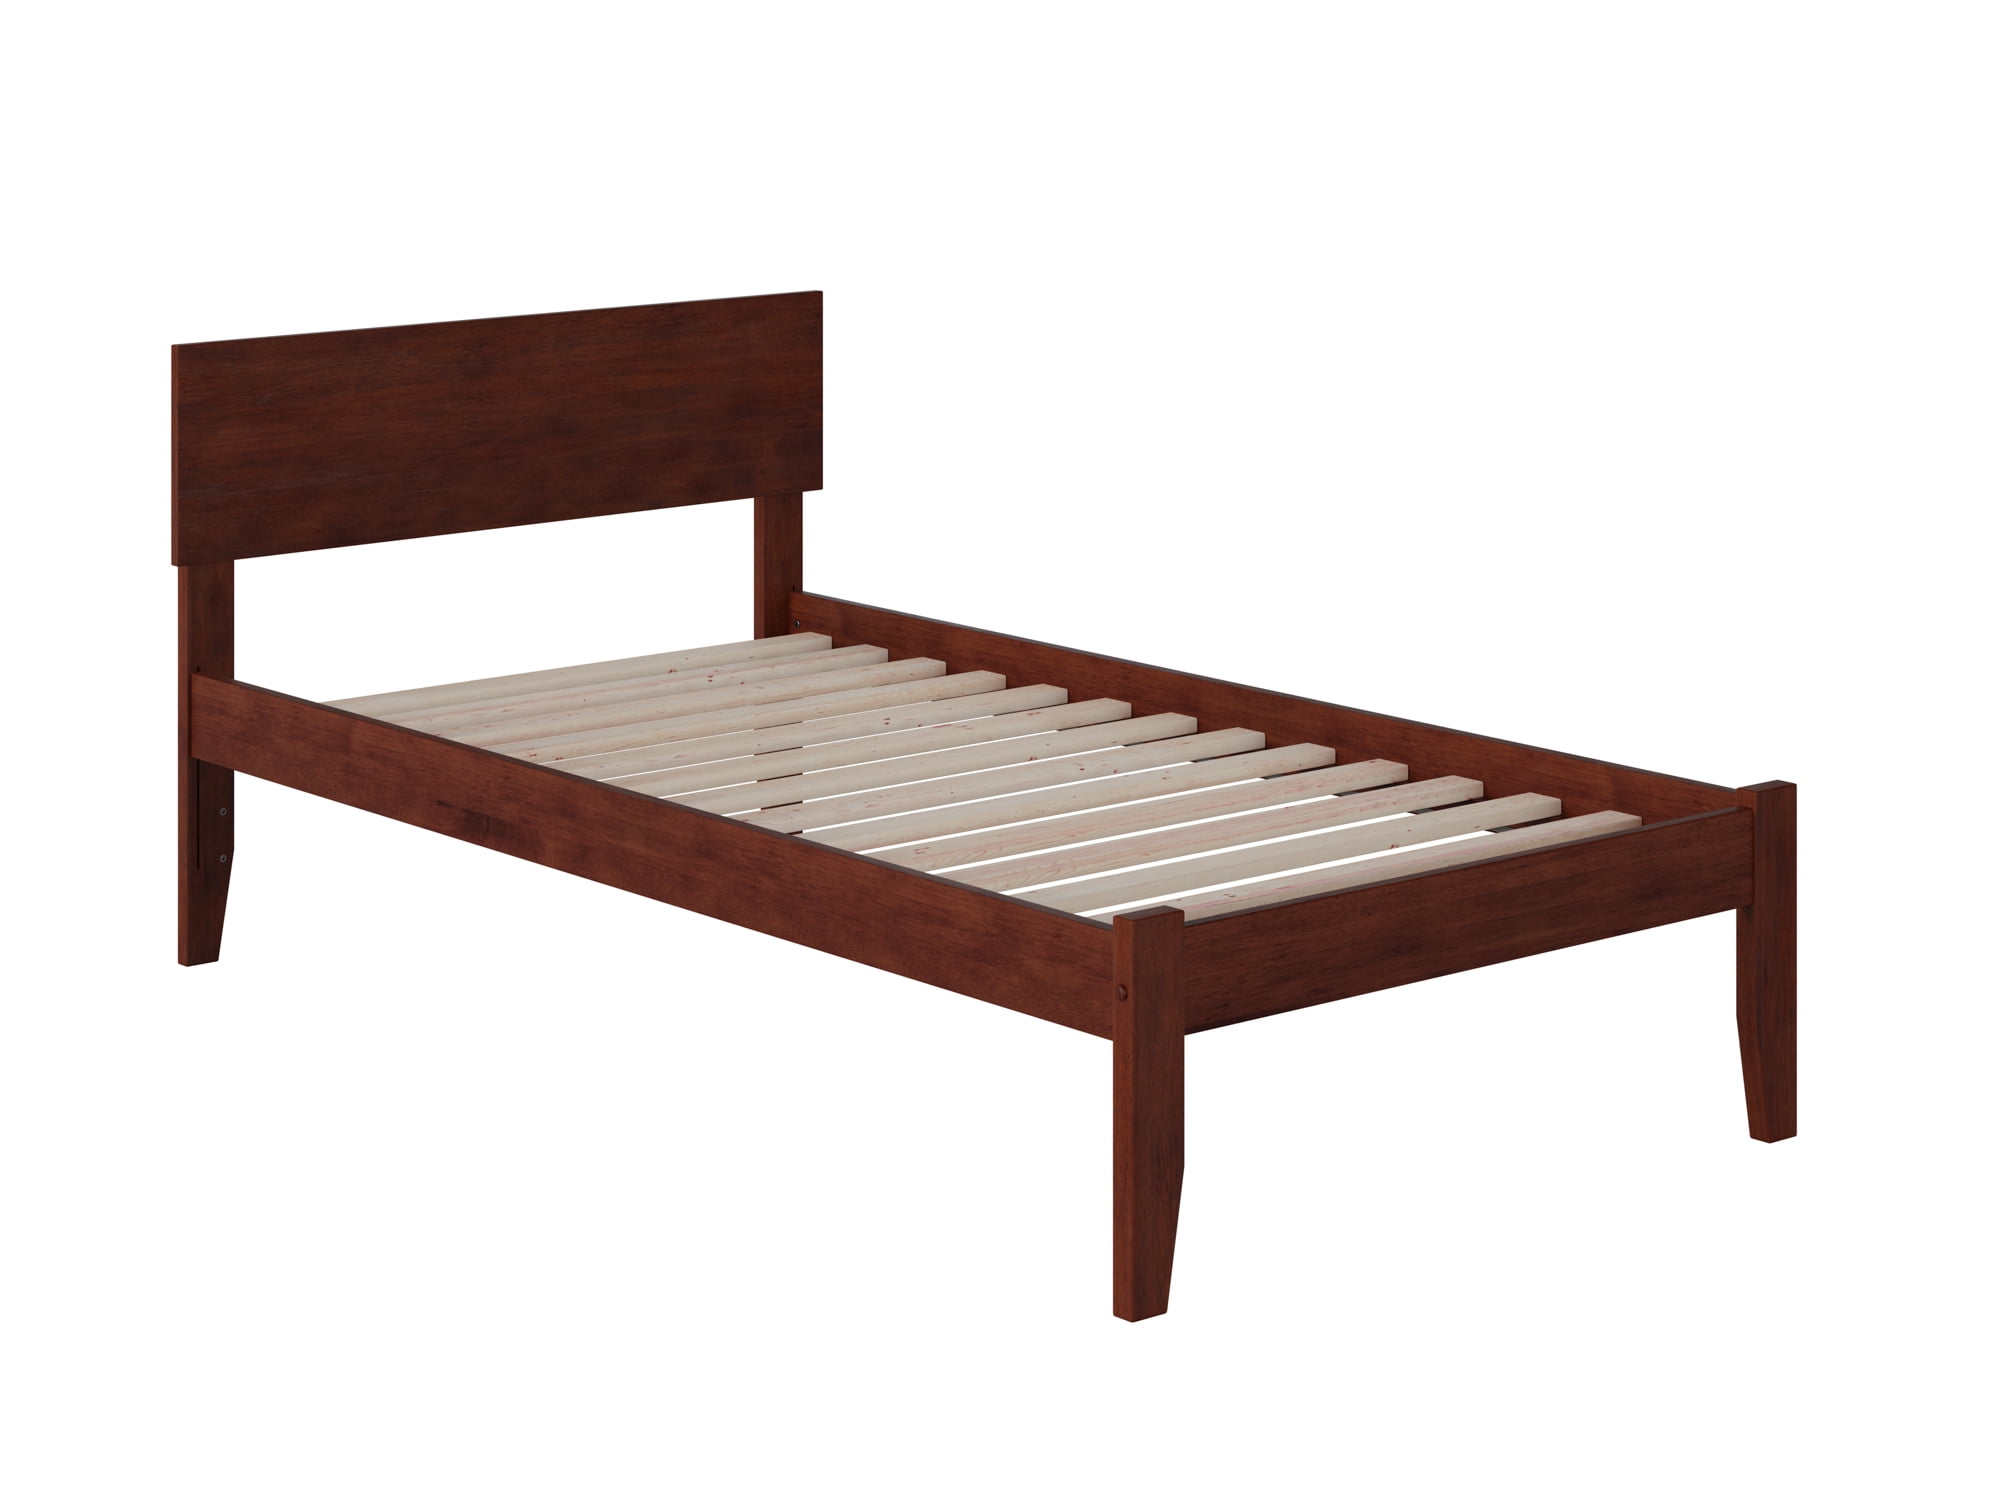 Picture of Atlantic Furniture AR8111004 Orlando Open Foot Bed, Antique Walnut - Twin Extra Large